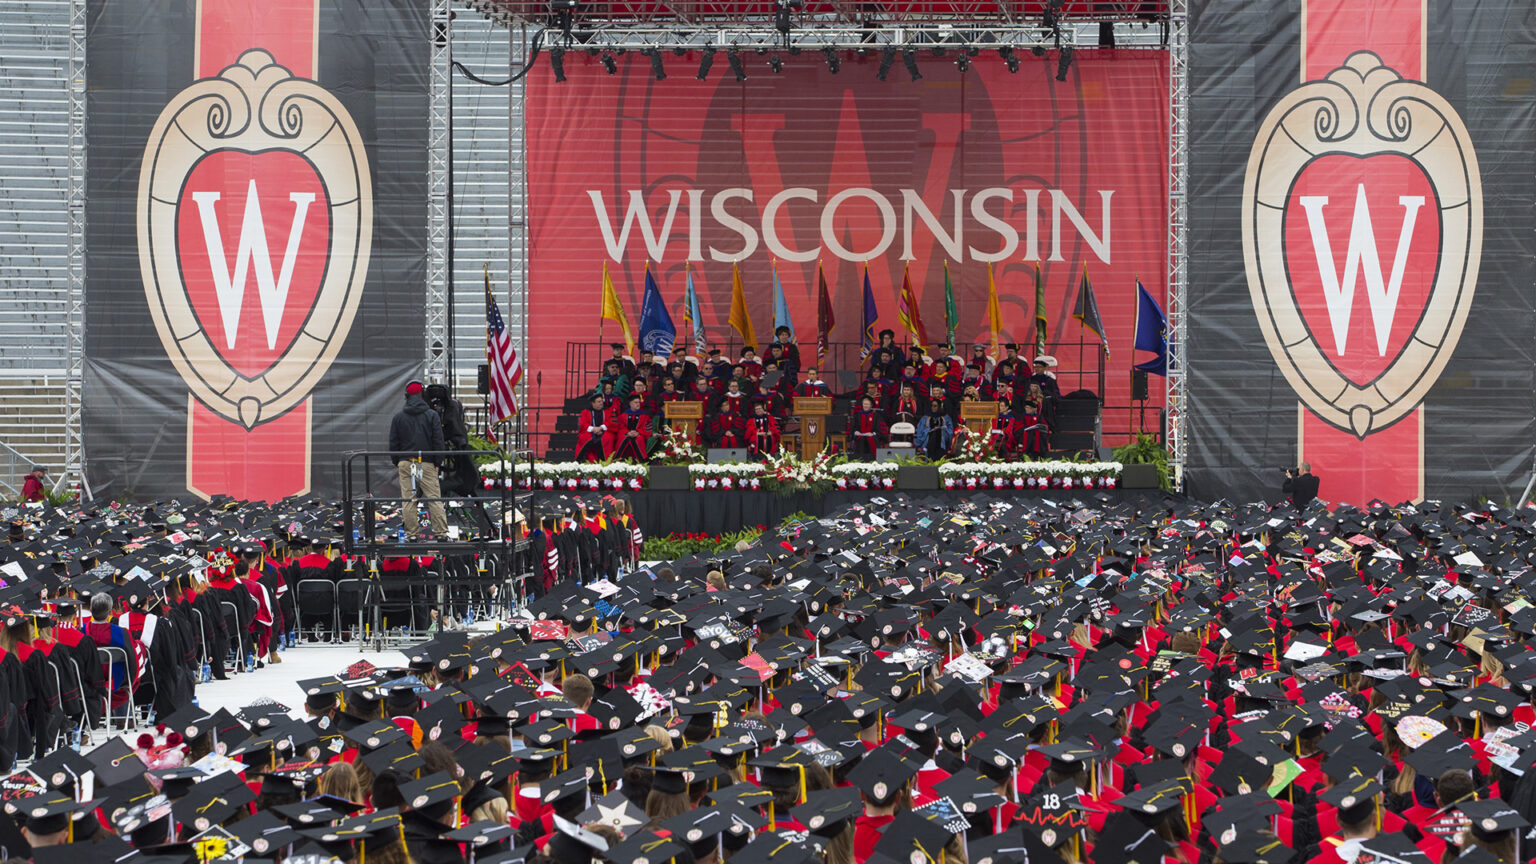 Students wearing graduation attire of caps and gowns are seated in rows facing a stage where faculty and administrators are seated in rises in front of a graphic banner with multiple versions of the UW-Madison W crest and a row of U.S., Wisconsin and other flags.